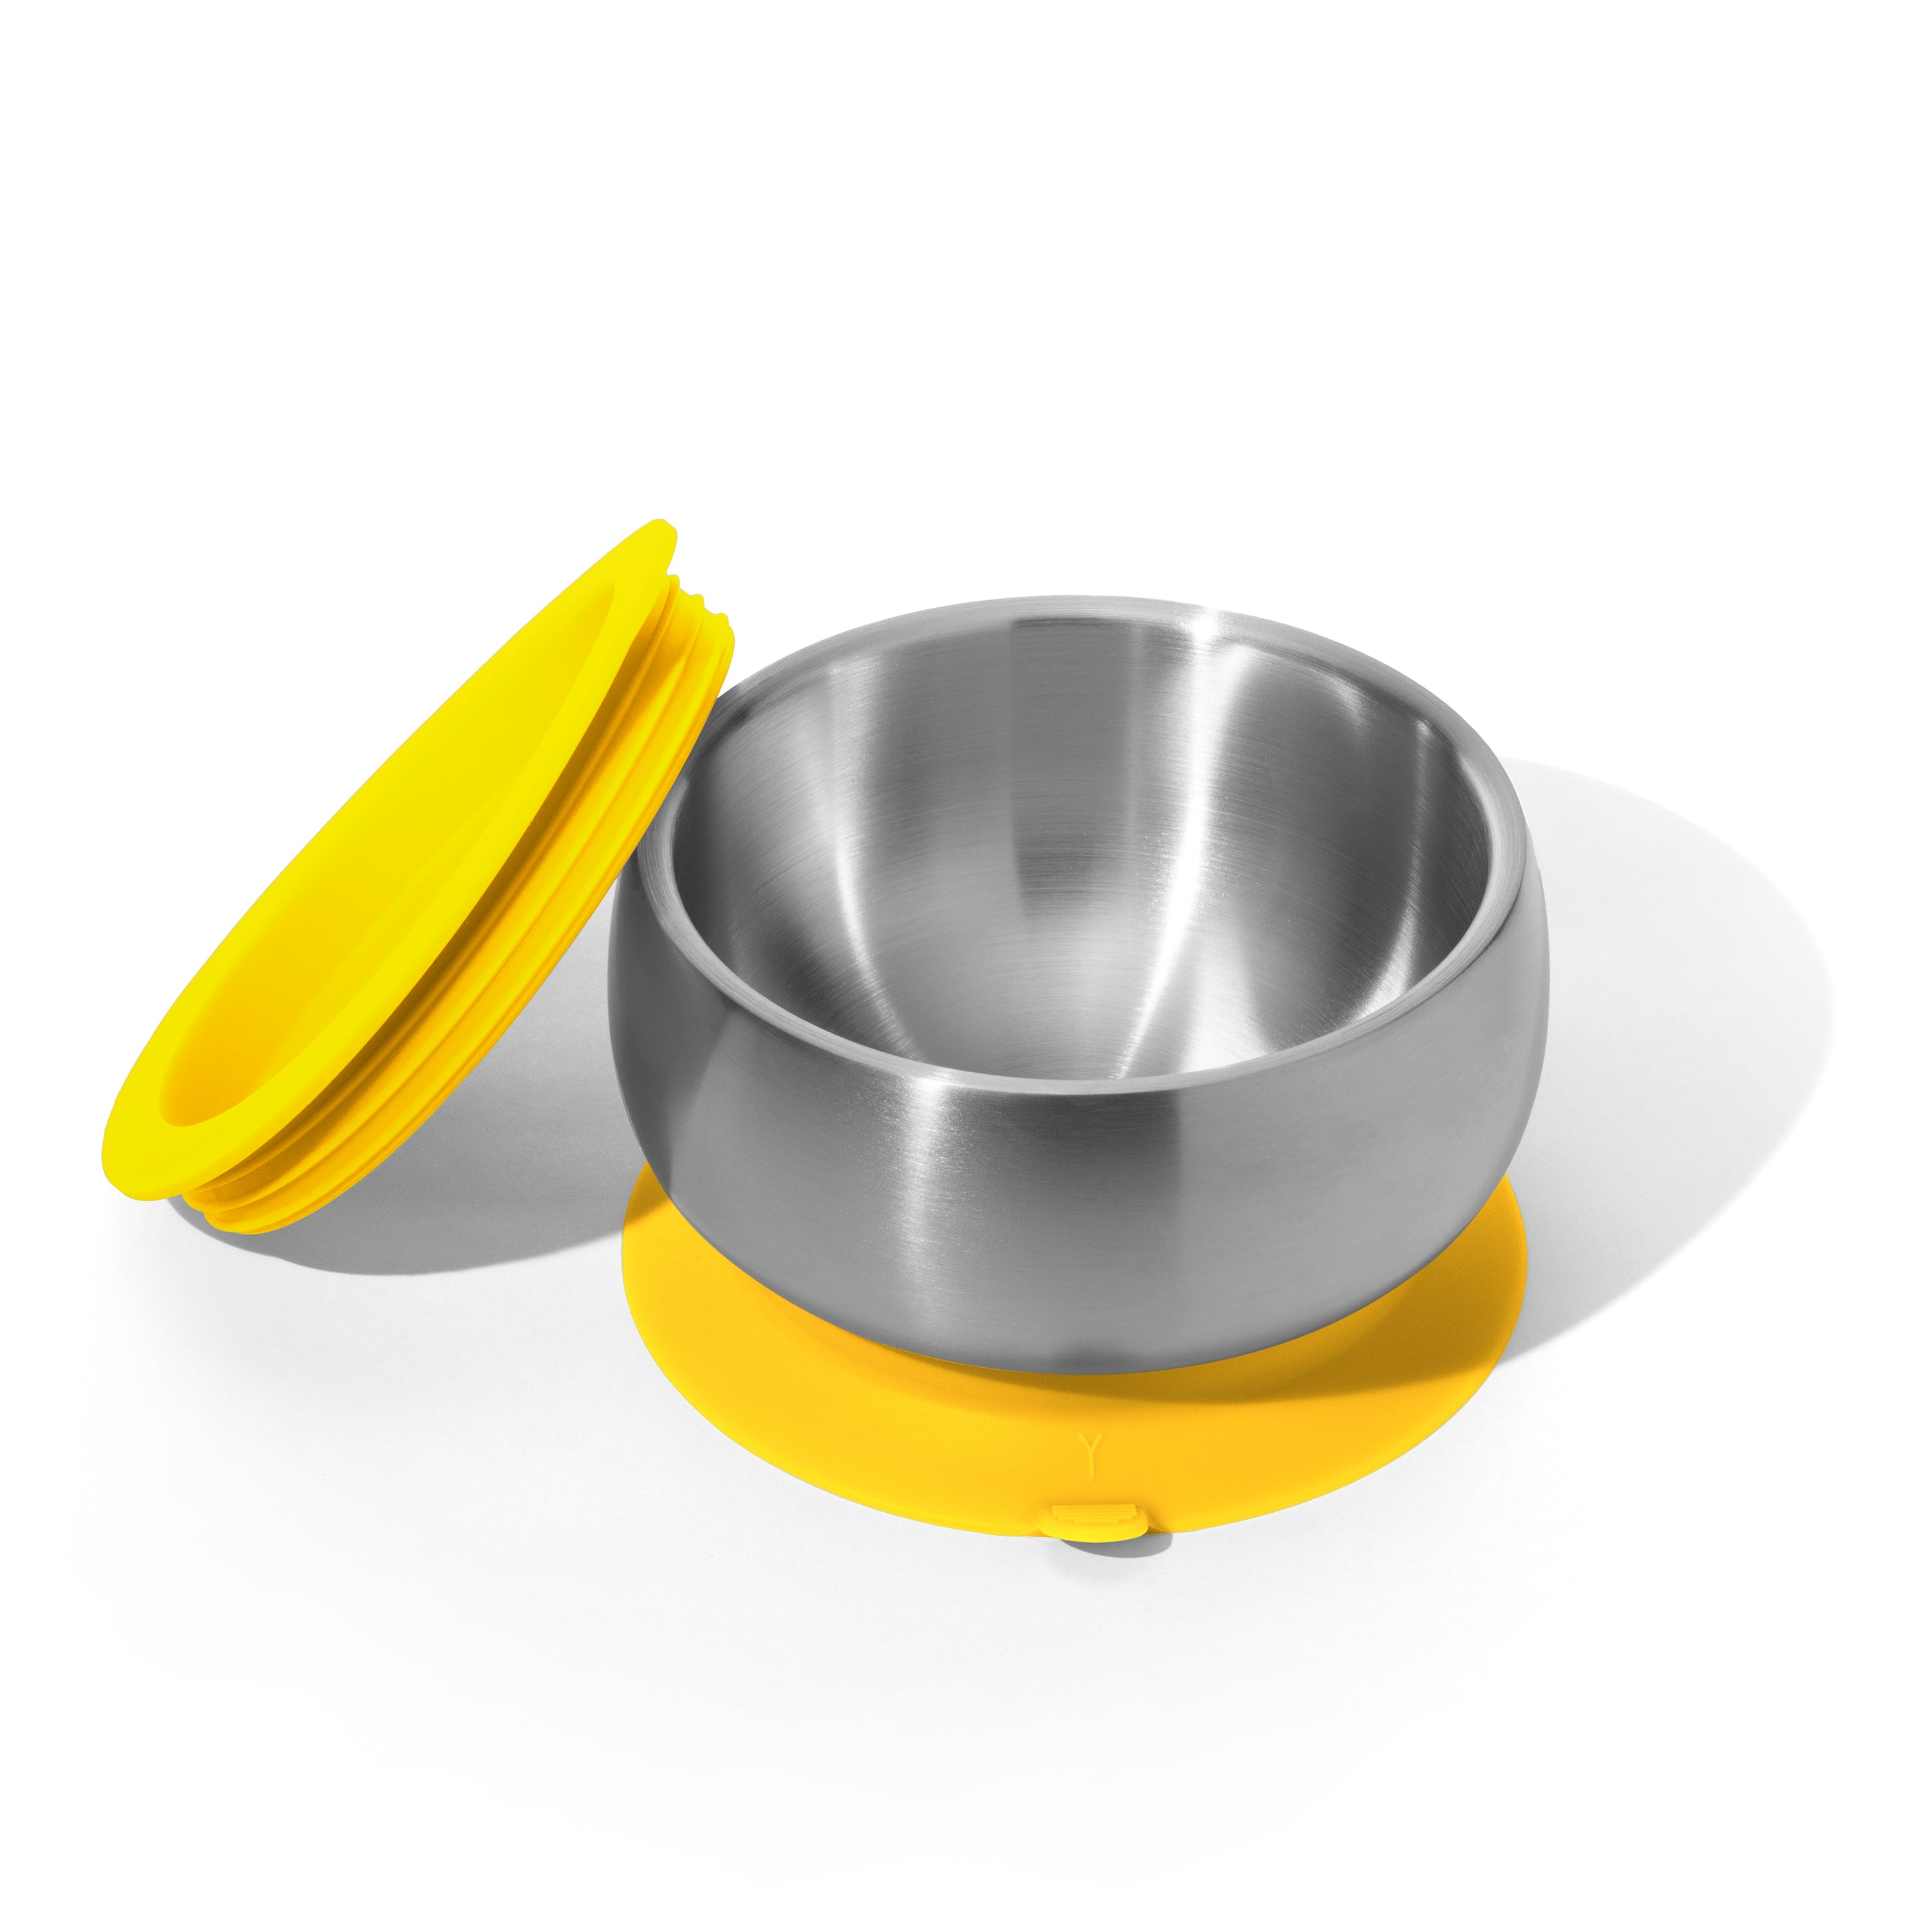 Avanchy Stainless Steel Baby Bowl With Lid - Yellow